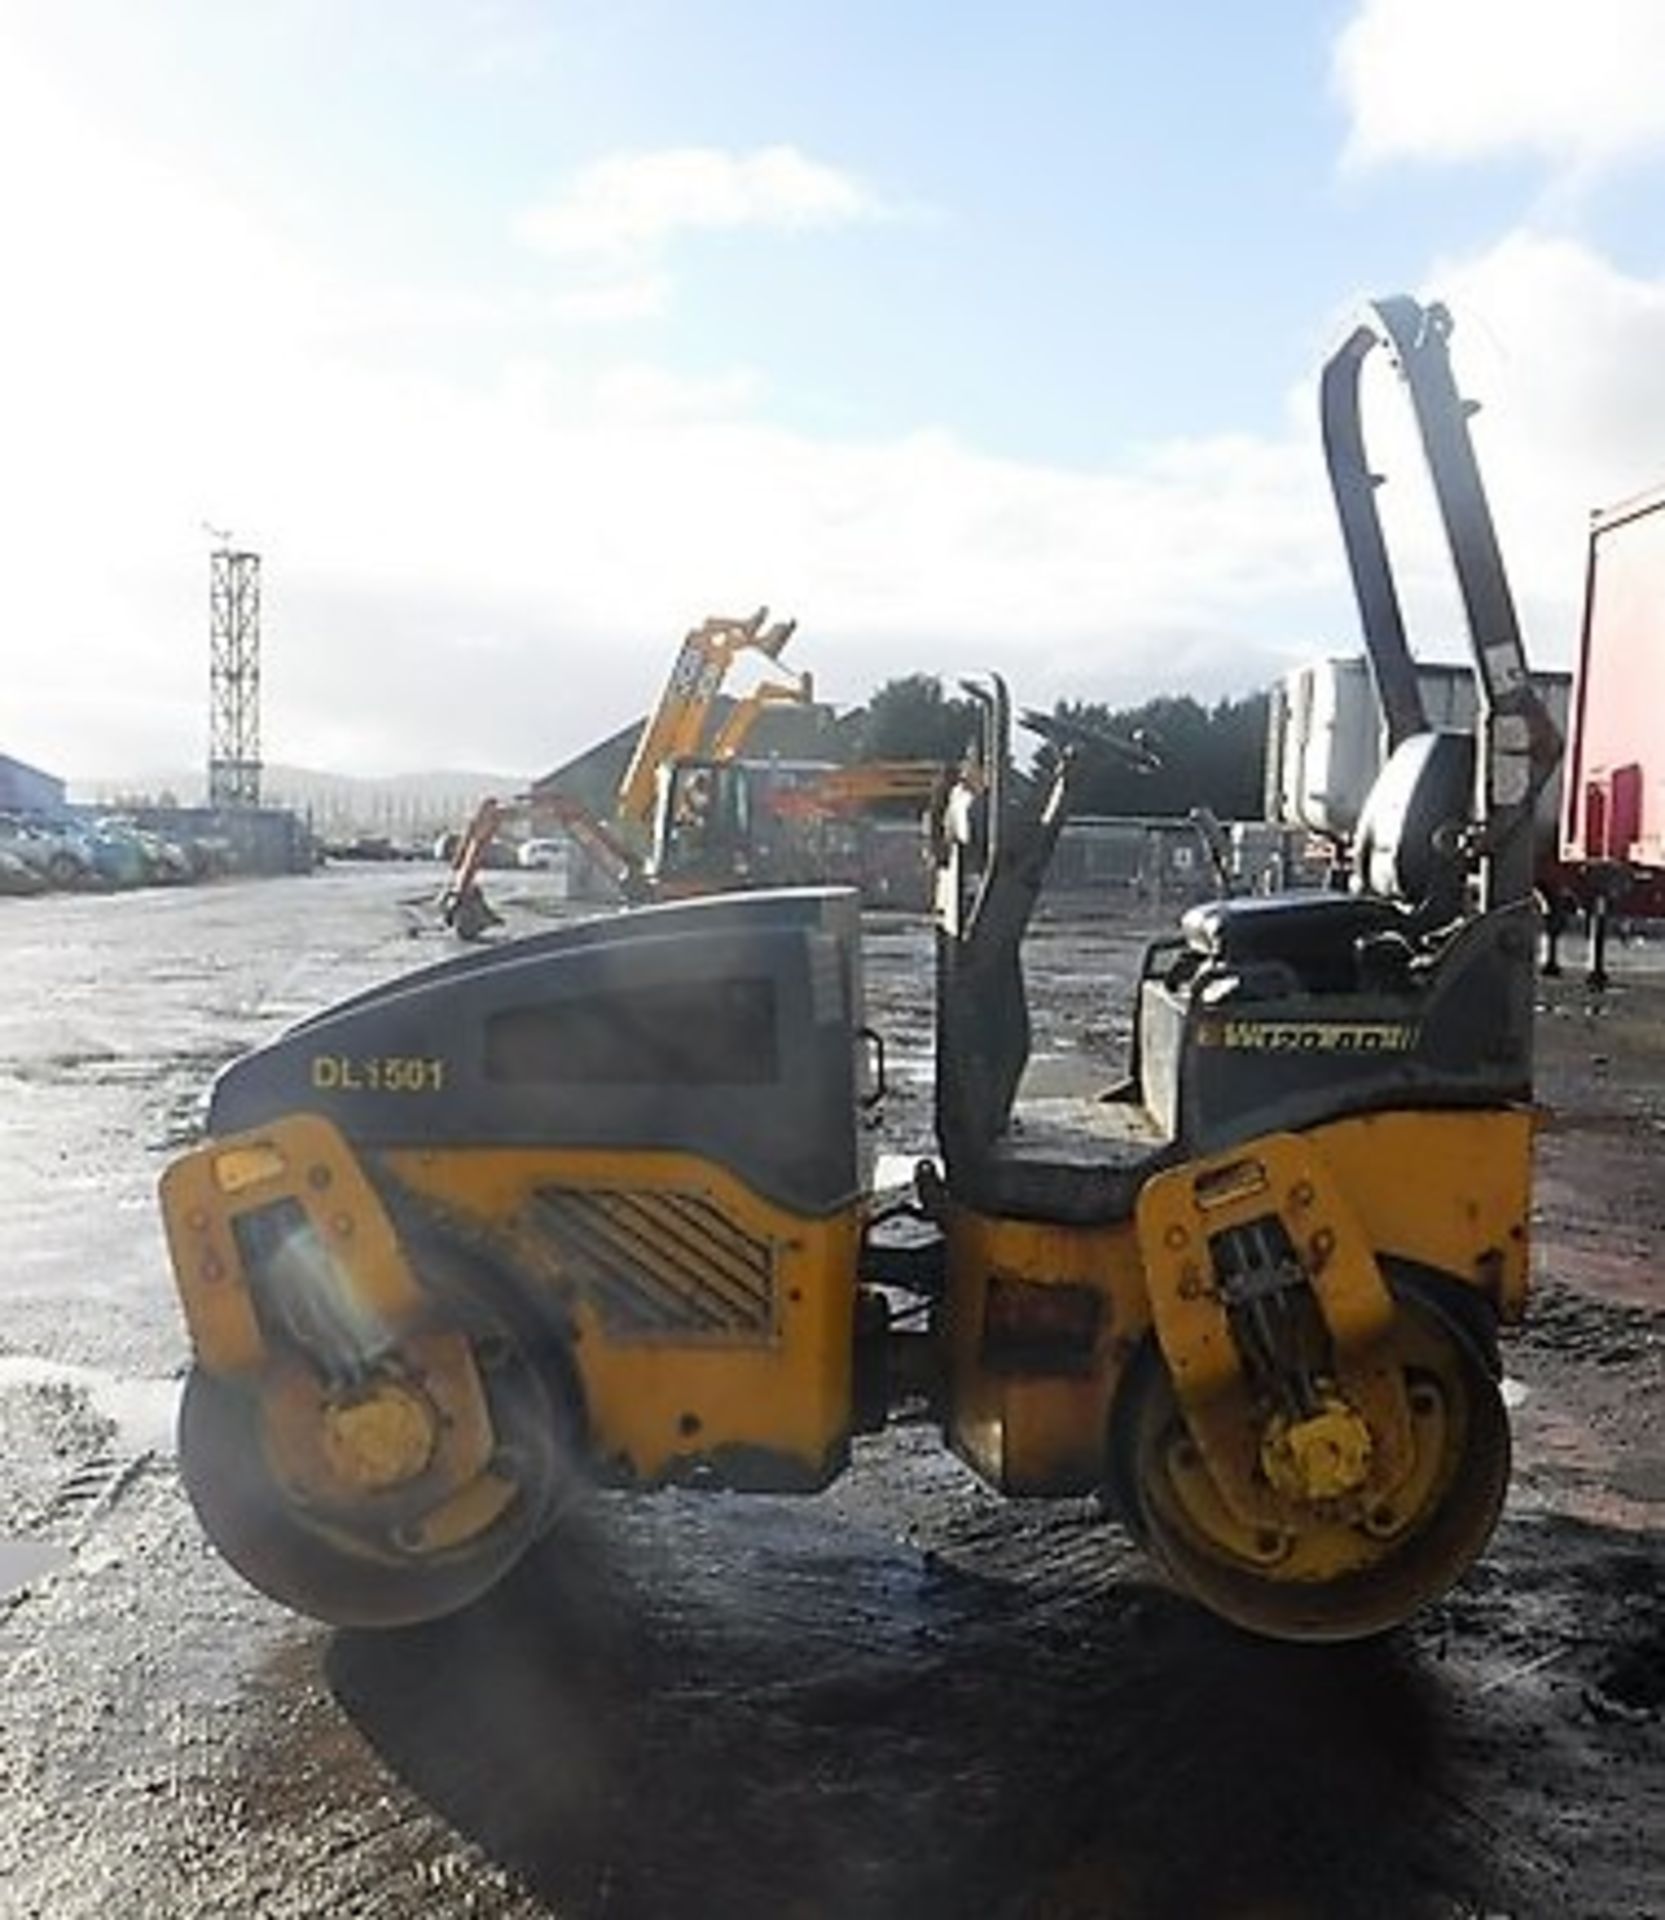 2006 BOMAG roller BW120AD-4 REG NO SV07 BAO 1022 hrs (not verified)SN - 101880023247 - Image 8 of 13